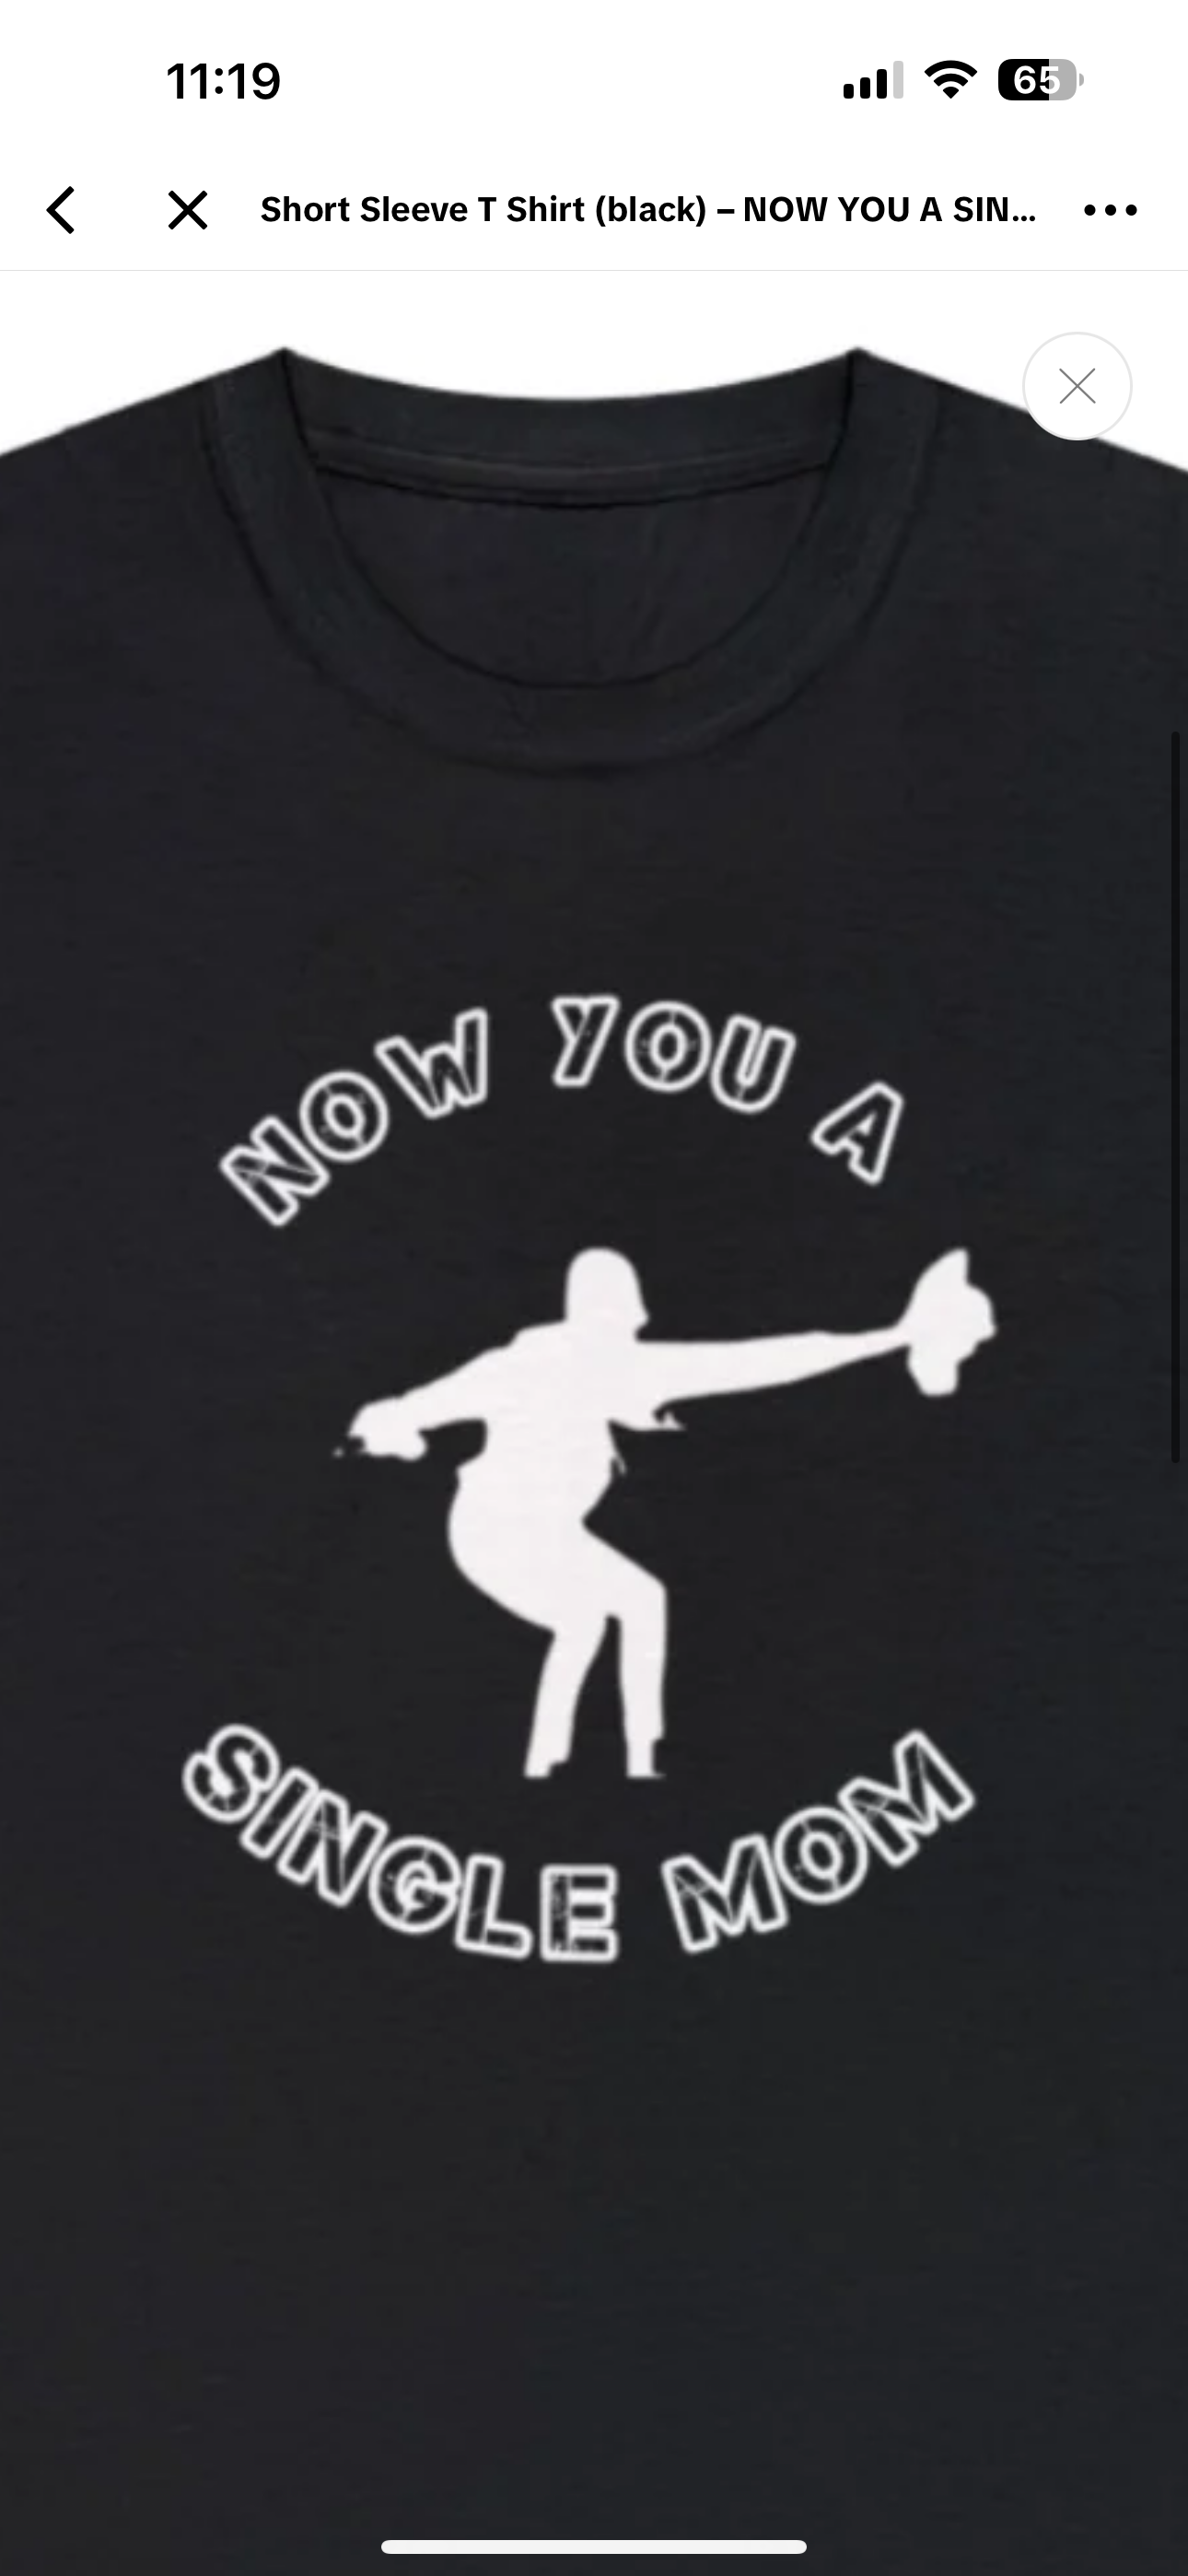 Now your a single mom t shirt